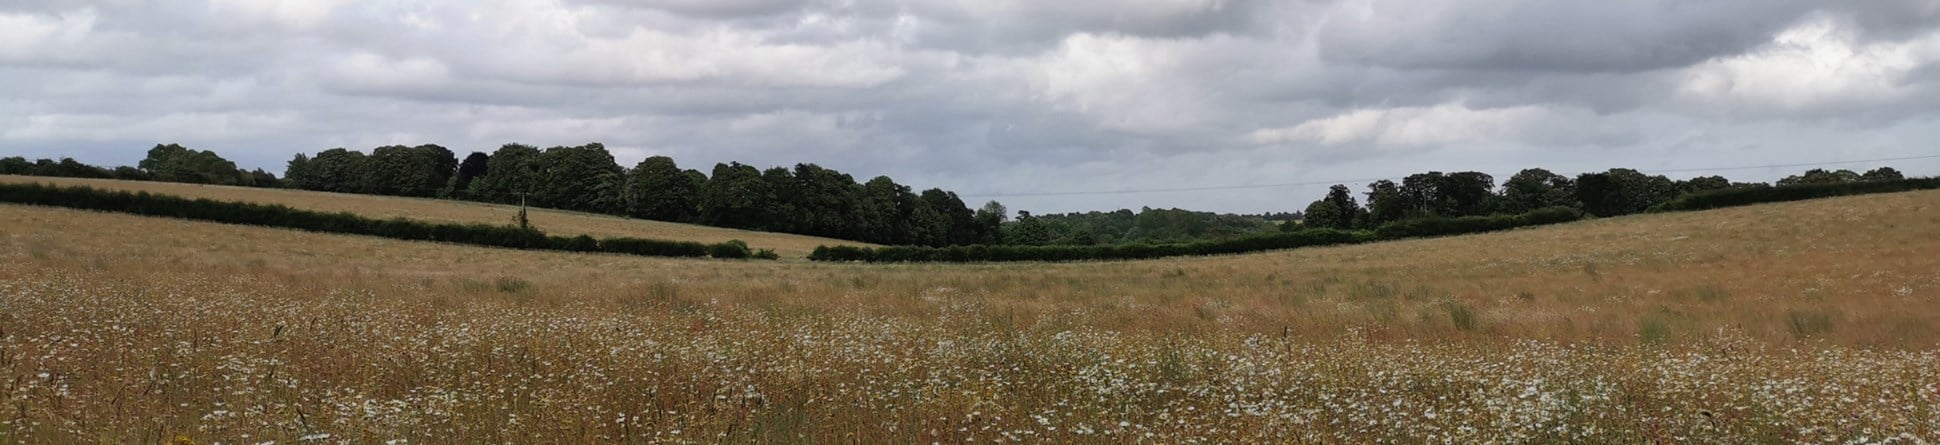 View across a meadow with woods in the background.